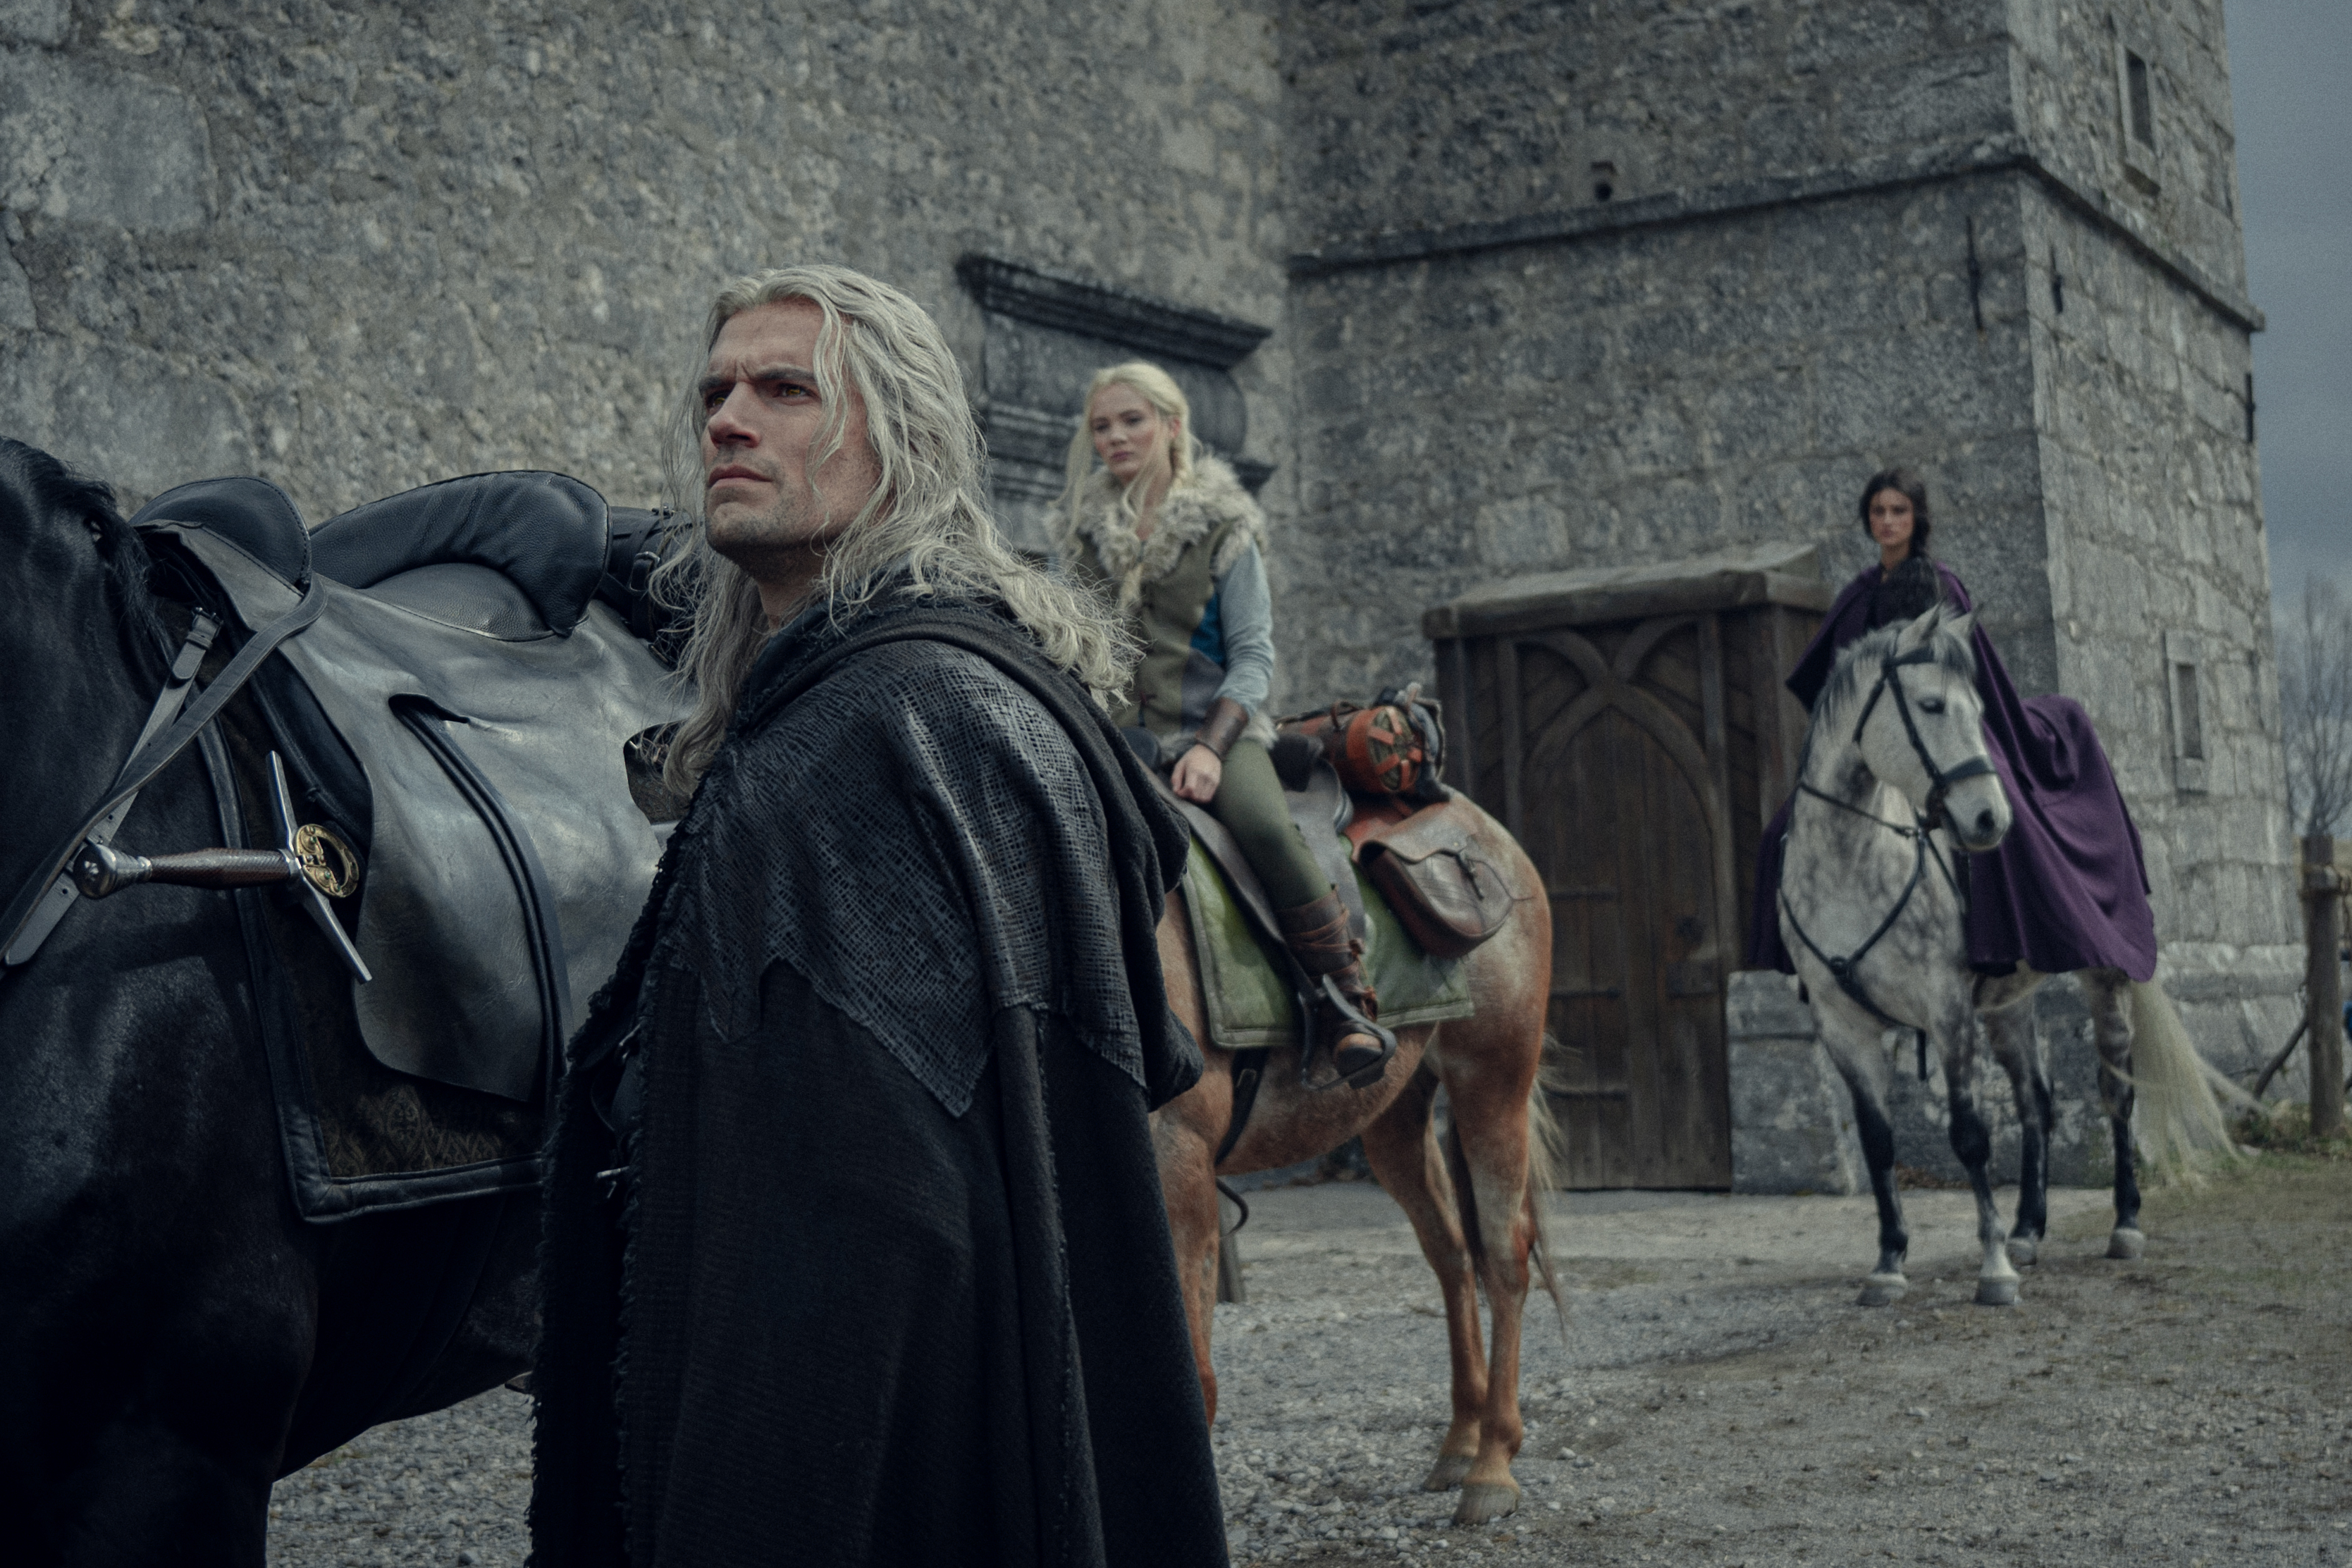 Geralt (Henry Cavill), Ciri (Freya Allan), and Yen (Anya Charlotra) get ready to ride their horses in a still from The Witcher season 3